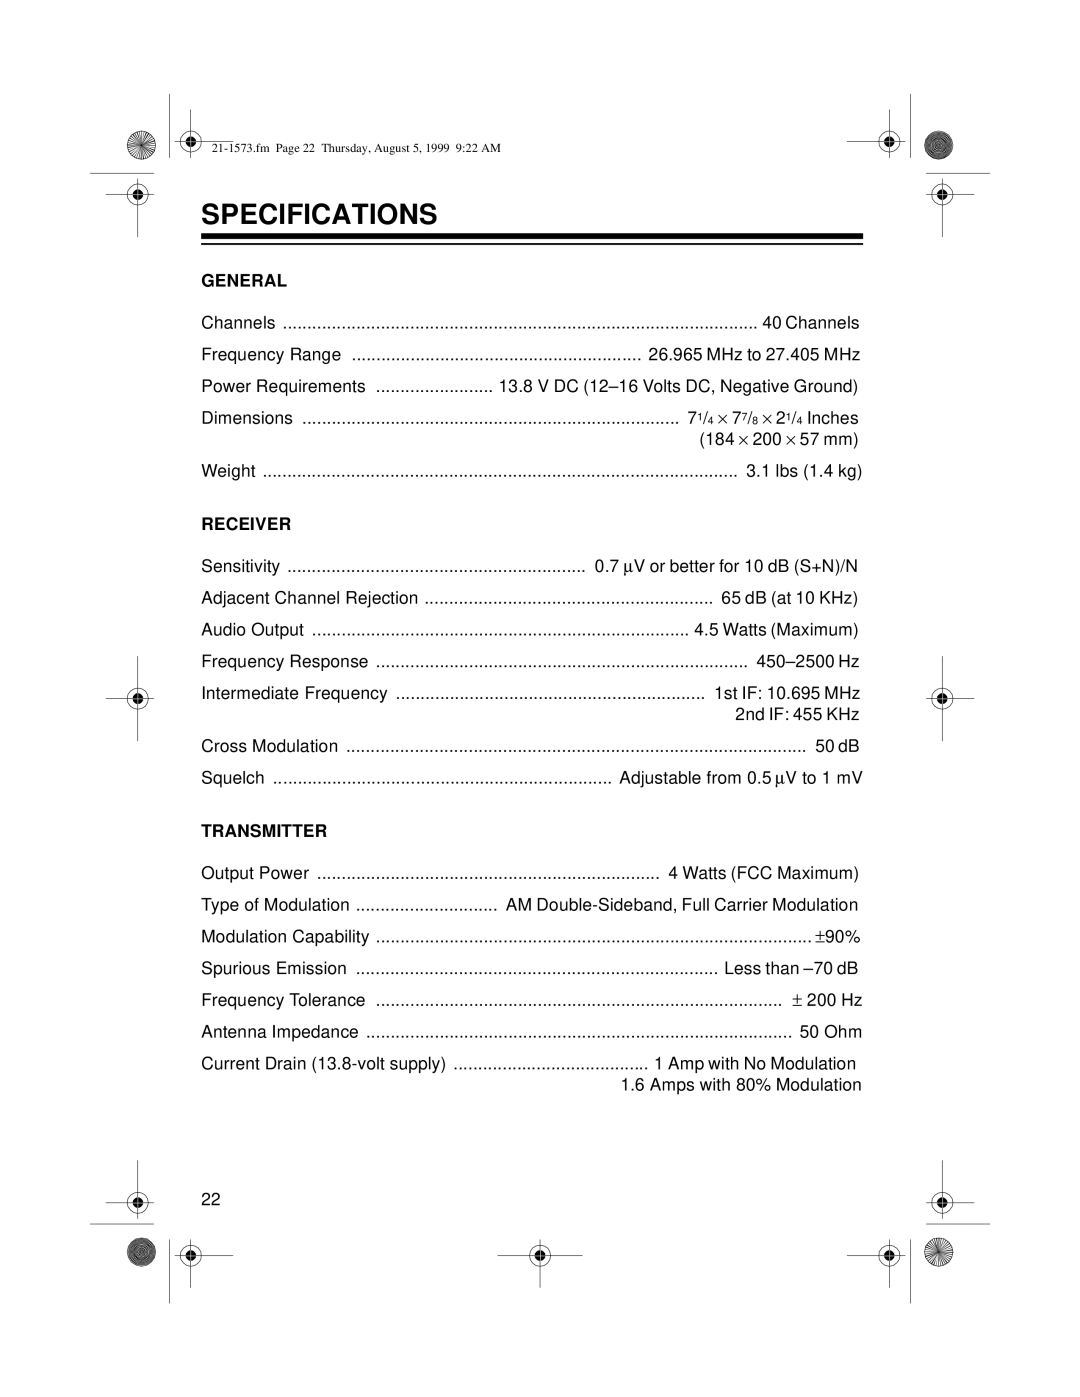 Samsung TRC-445 owner manual Specifications, General, Receiver, Transmitter 